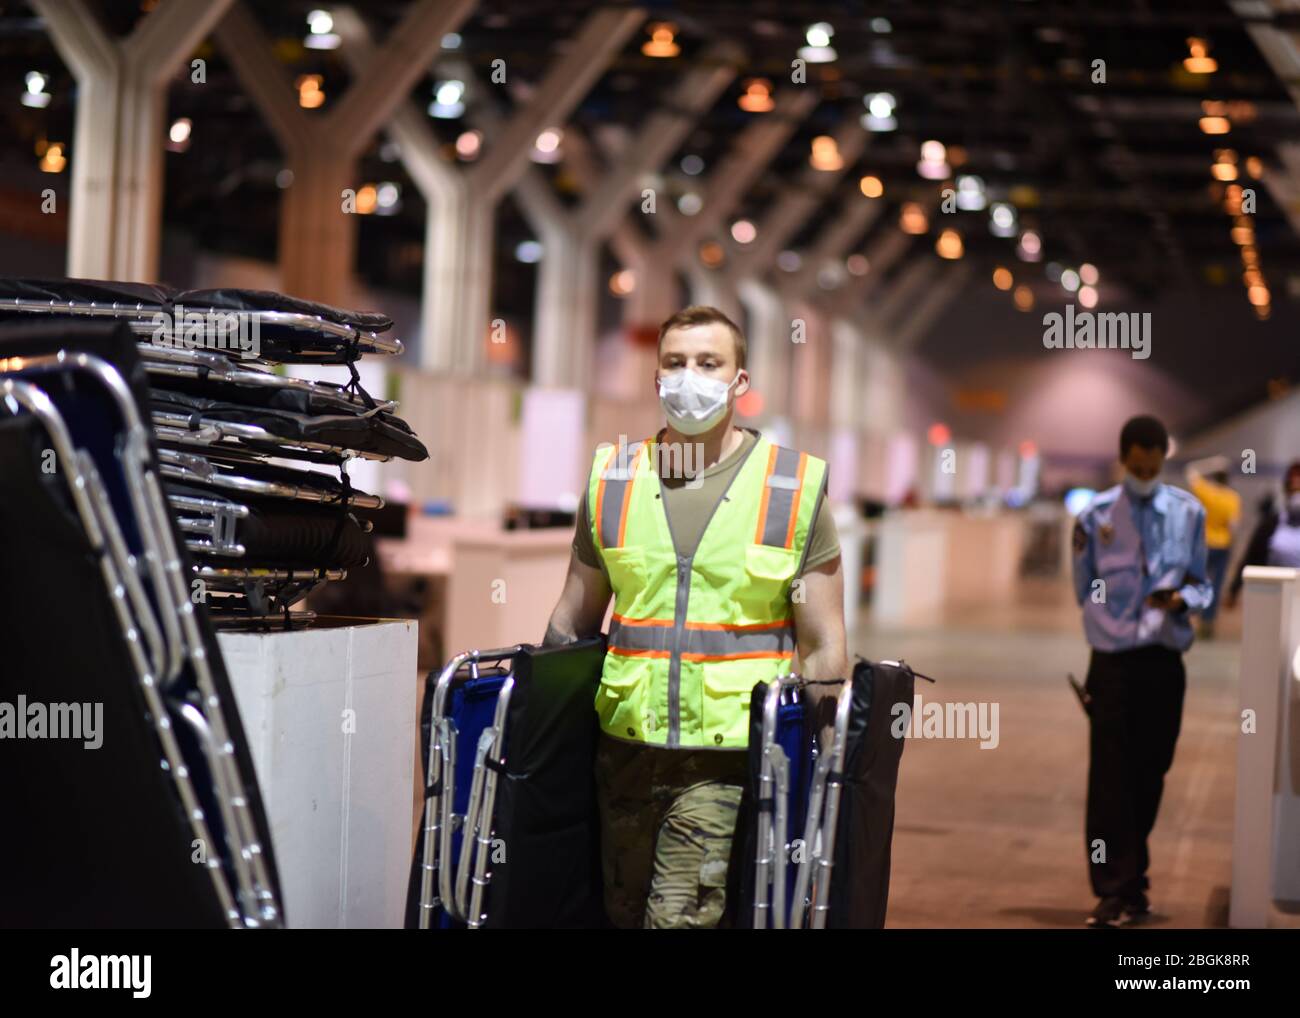 U.S. Air Force Senior Airman Jacob Taylor, from the 183d Wing, based at Springfield, Ill. removes cots from a wing dedicated to elderly patients to make room for more comfortable hospital beds at McCormick Place Convention Center in response to the COVID-19 pandemic in Chicago, April 13, 2020. Approximately 60 members of the Illinois Air National Guard were activated to support the U.S. Army Corps of Engineers and the Federal Emergency Management Agency (FEMA) to temporarily convert part of the McCormick Place Convention Center into an Alternate Care Facility (ACF) for COVID-19 patients with m Stock Photo